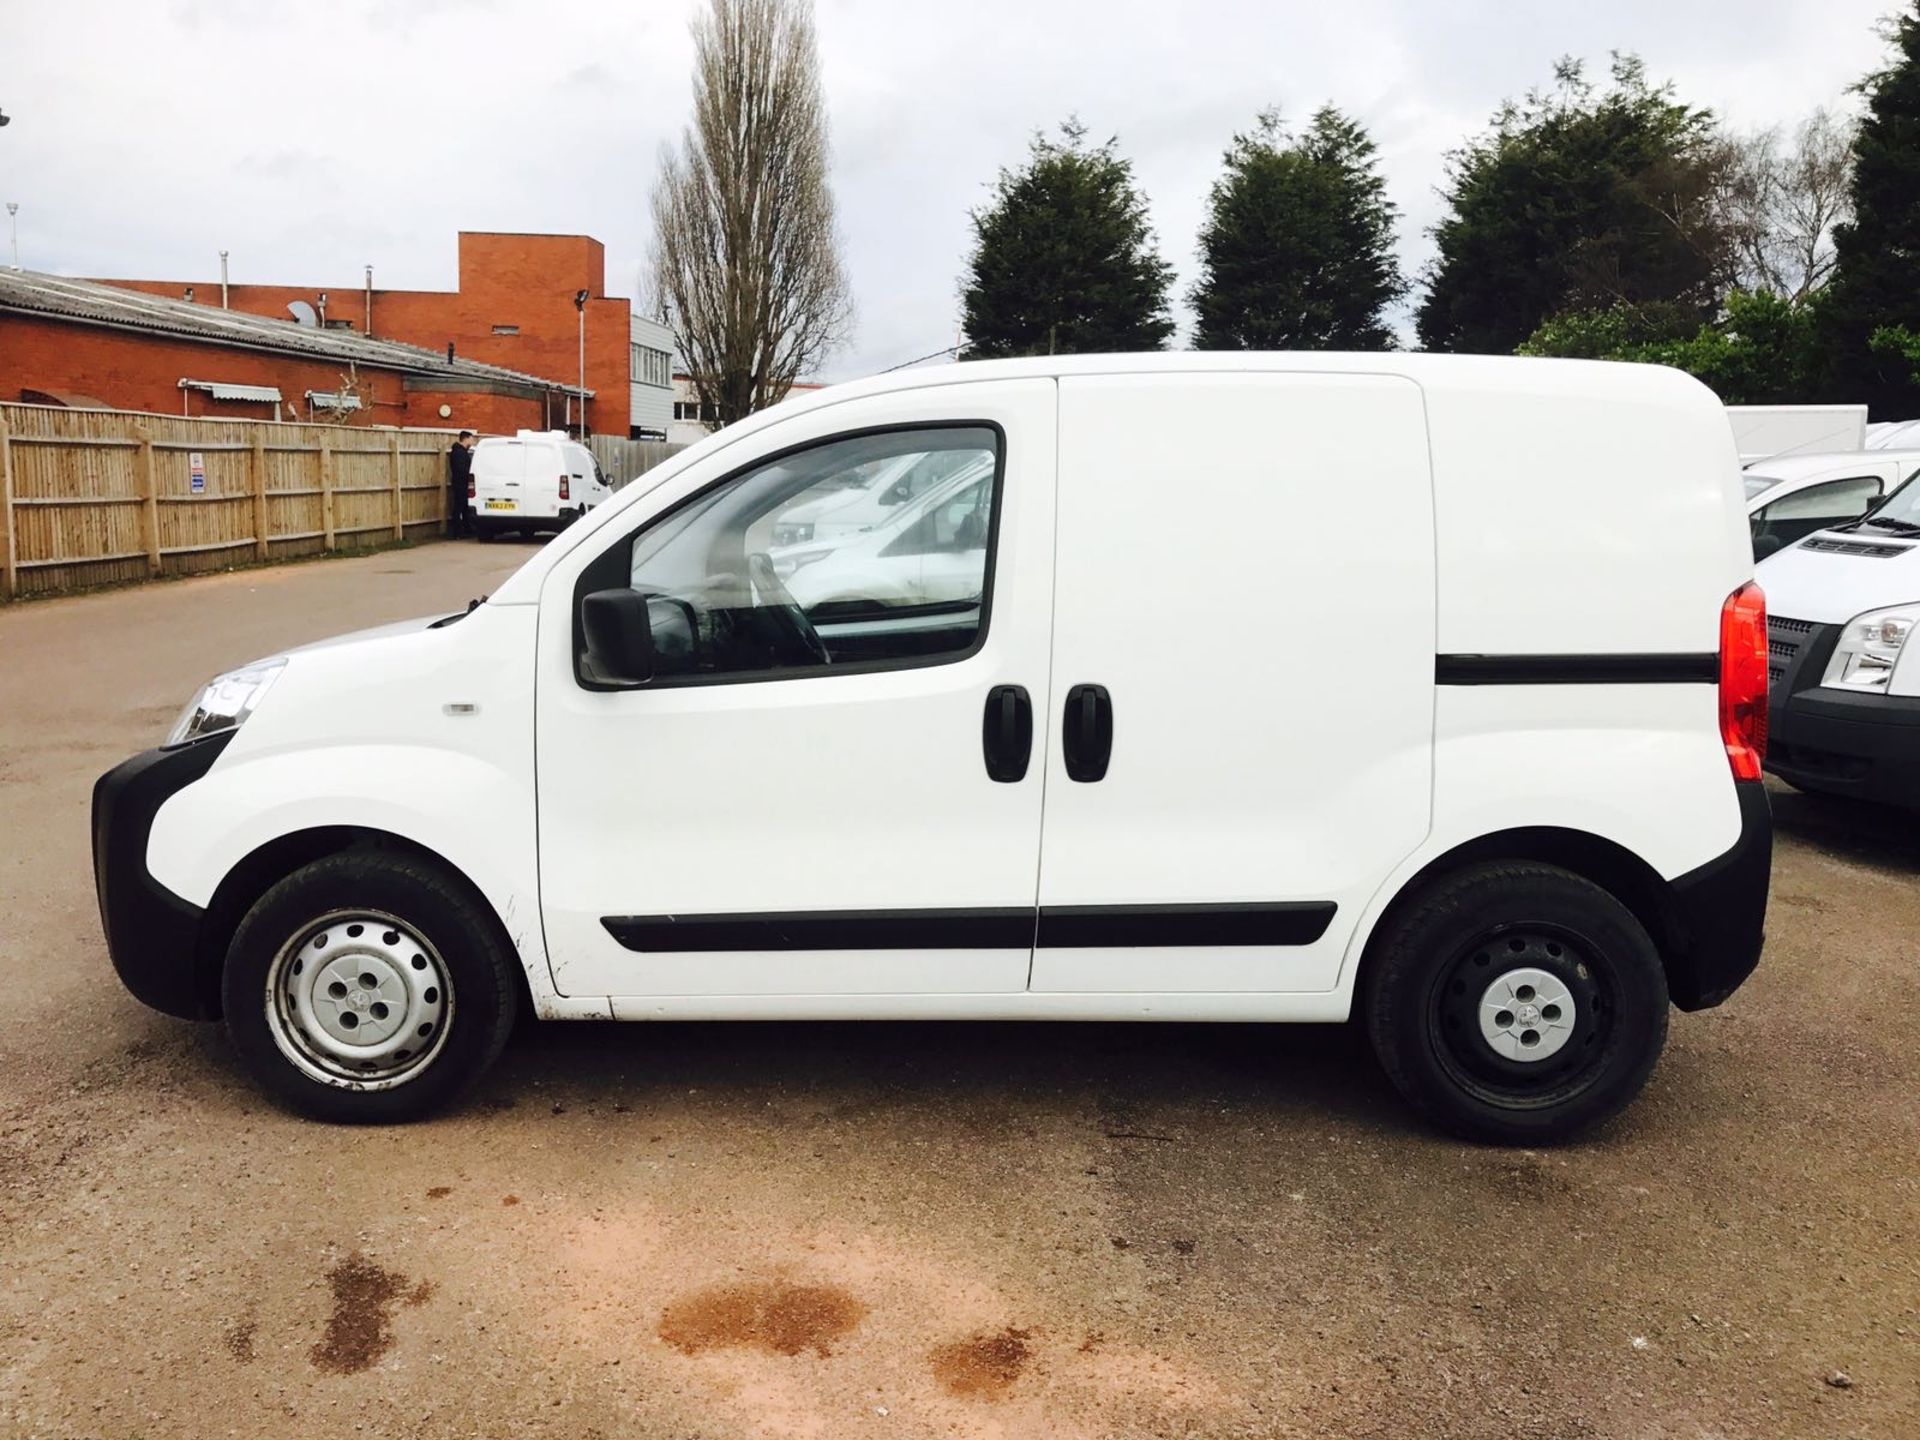 ON SALE PEUGEOT BIPPER 1.3HDI "PLUS PACK" - 2014 MODEL - 1 OWNER - AIR CON - BLUETOOTH - LOW MILES!! - Image 2 of 18